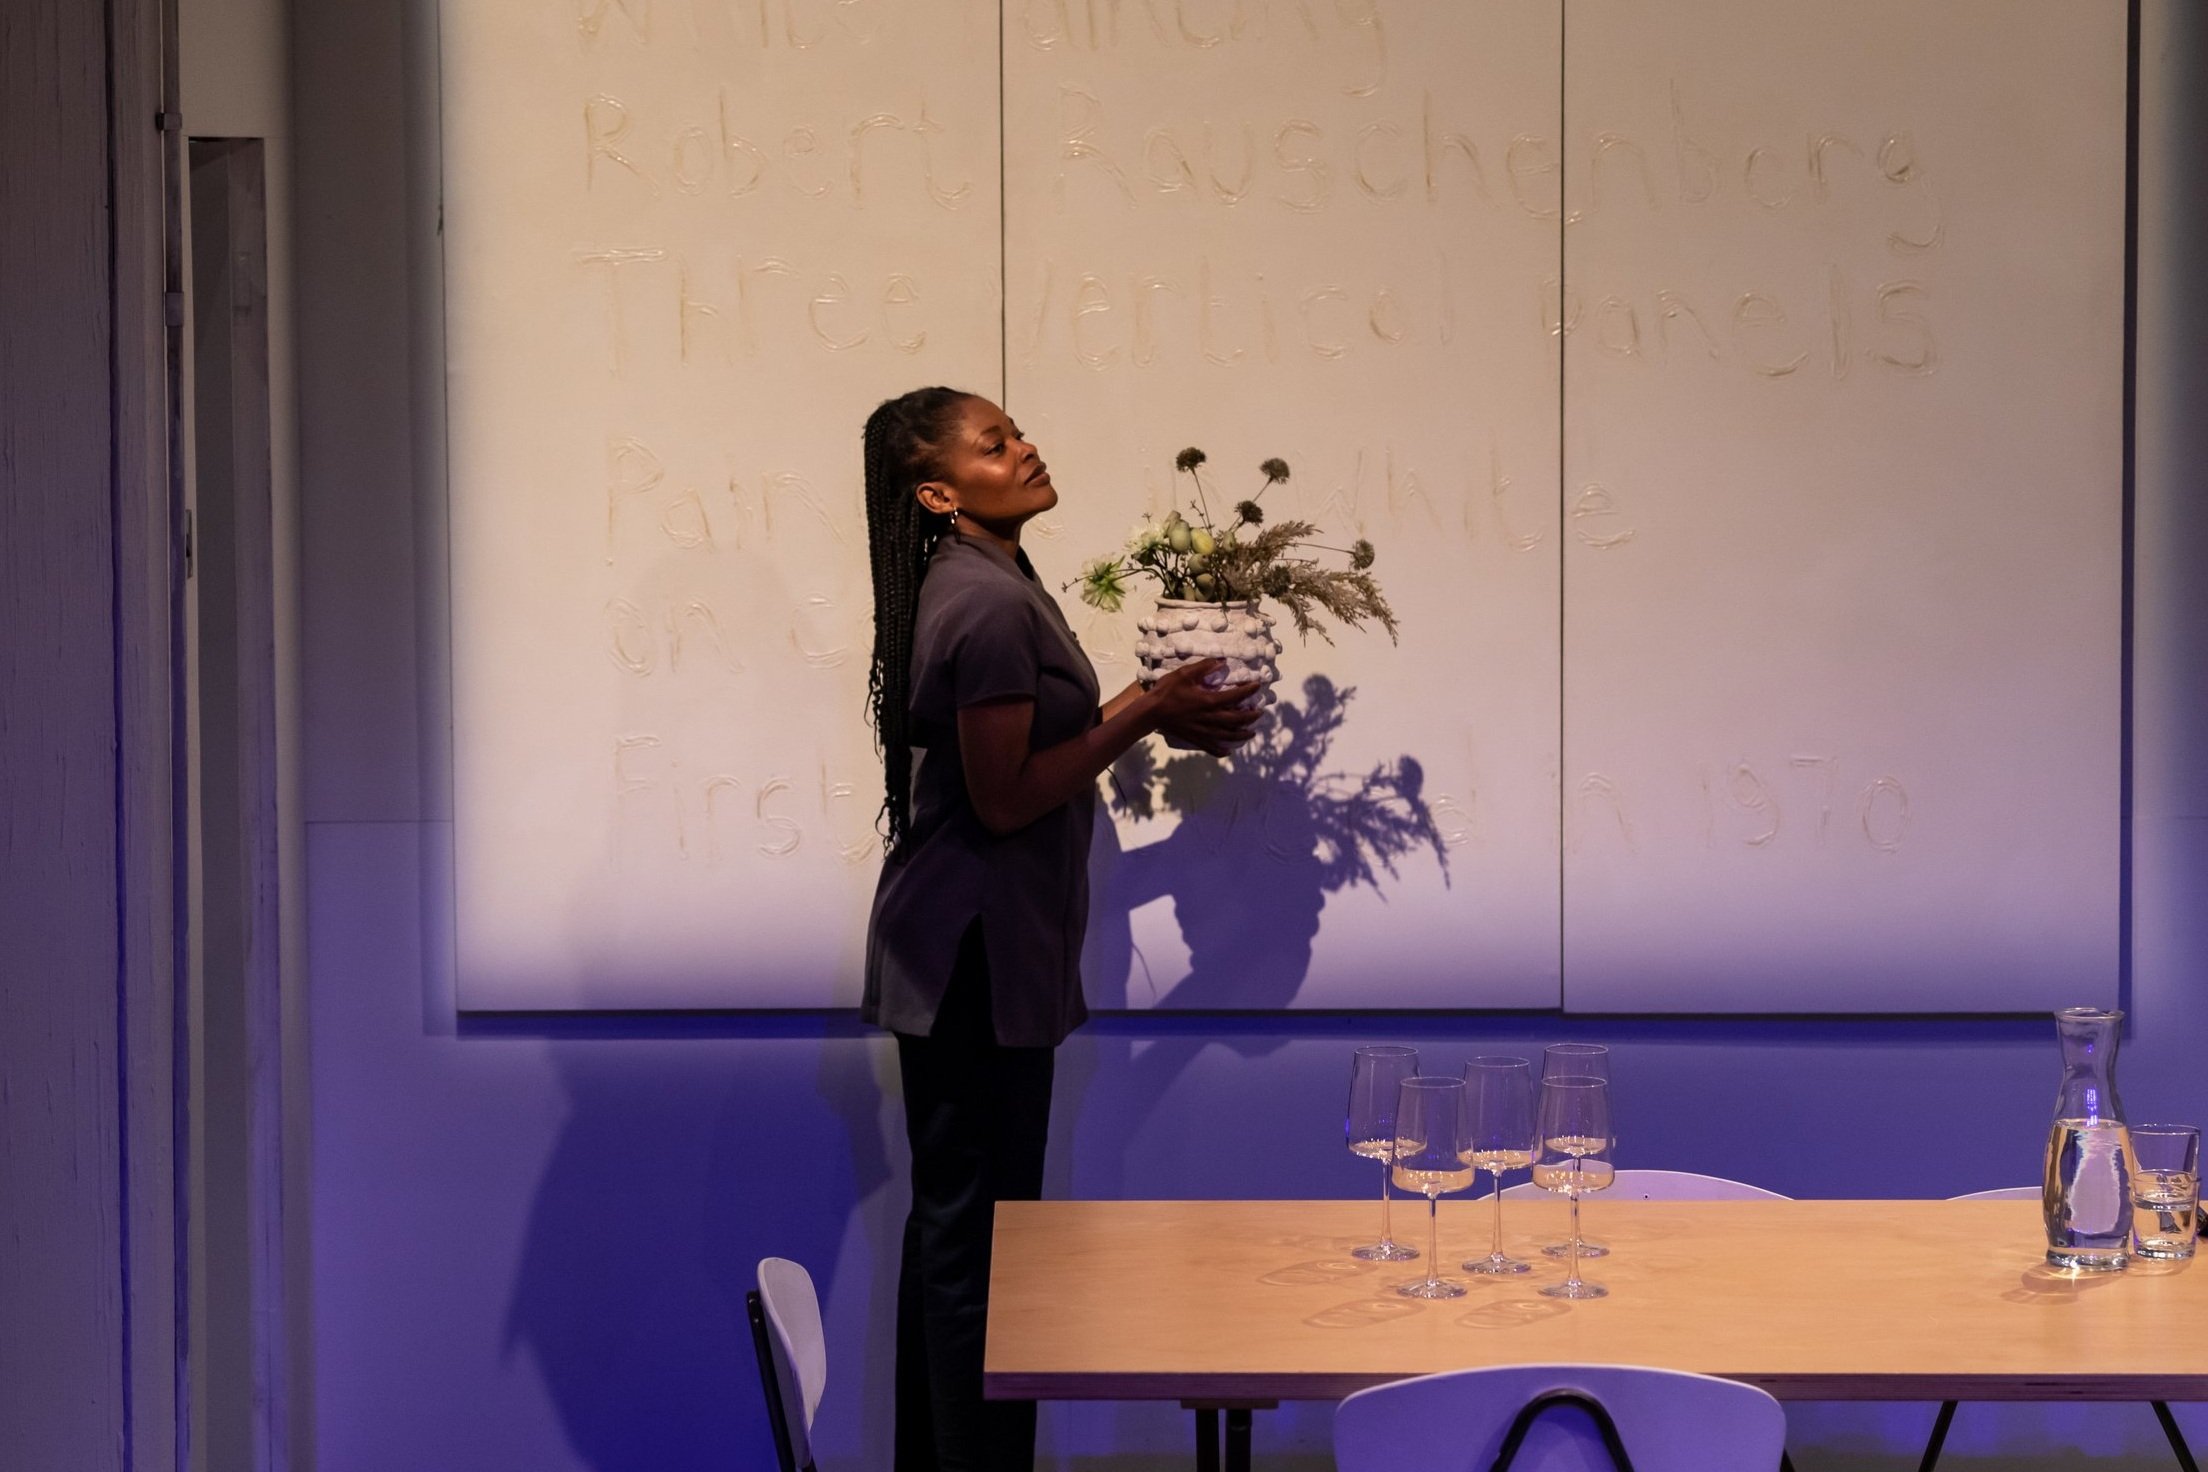   The White Card    Written by Claudia Rankine  Directed by Natalie Ibu  A  co-production between Northern Stage, Manchester HOME, Leeds Playhouse, Birmingham Rep and Soho theatre.   The White Card is a play that poses the question: can society progr